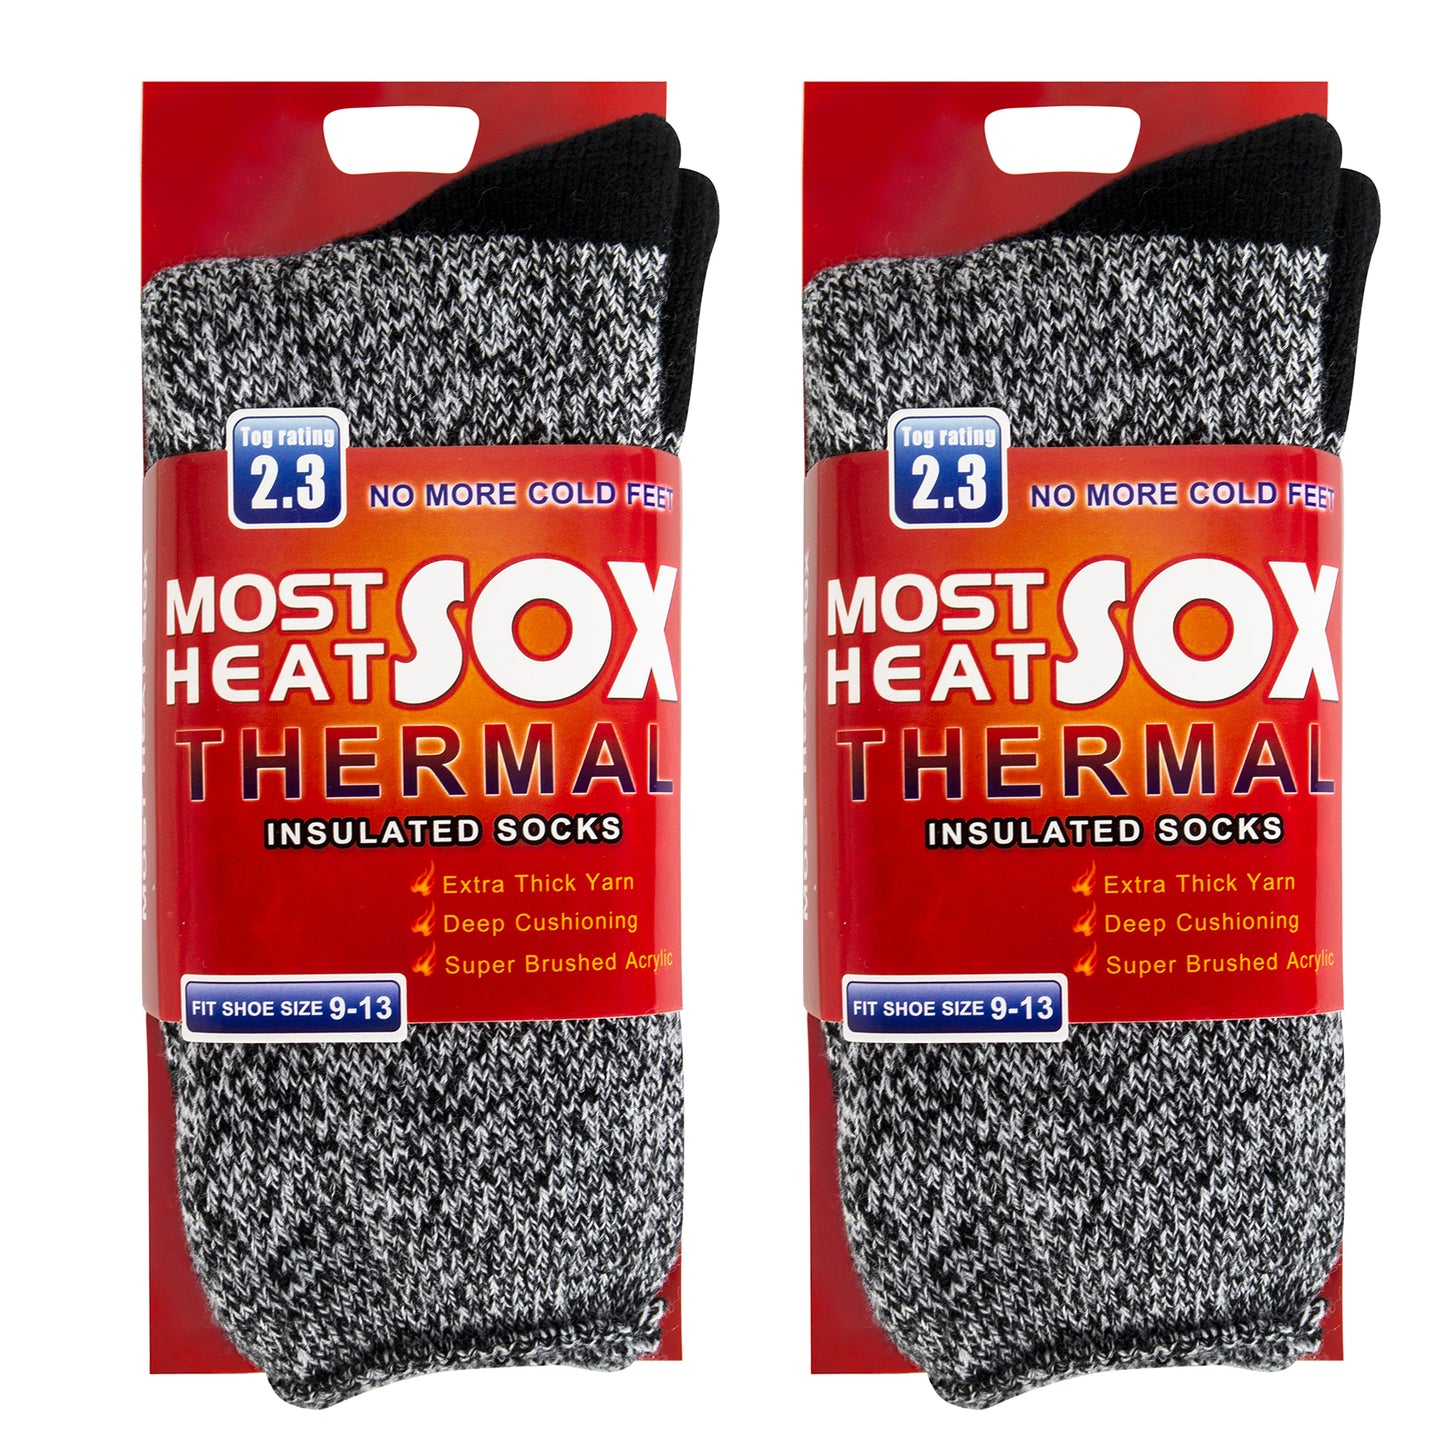 Loritta Thermal Socks for Men Winter Warm Heated Socks for Cold Weather